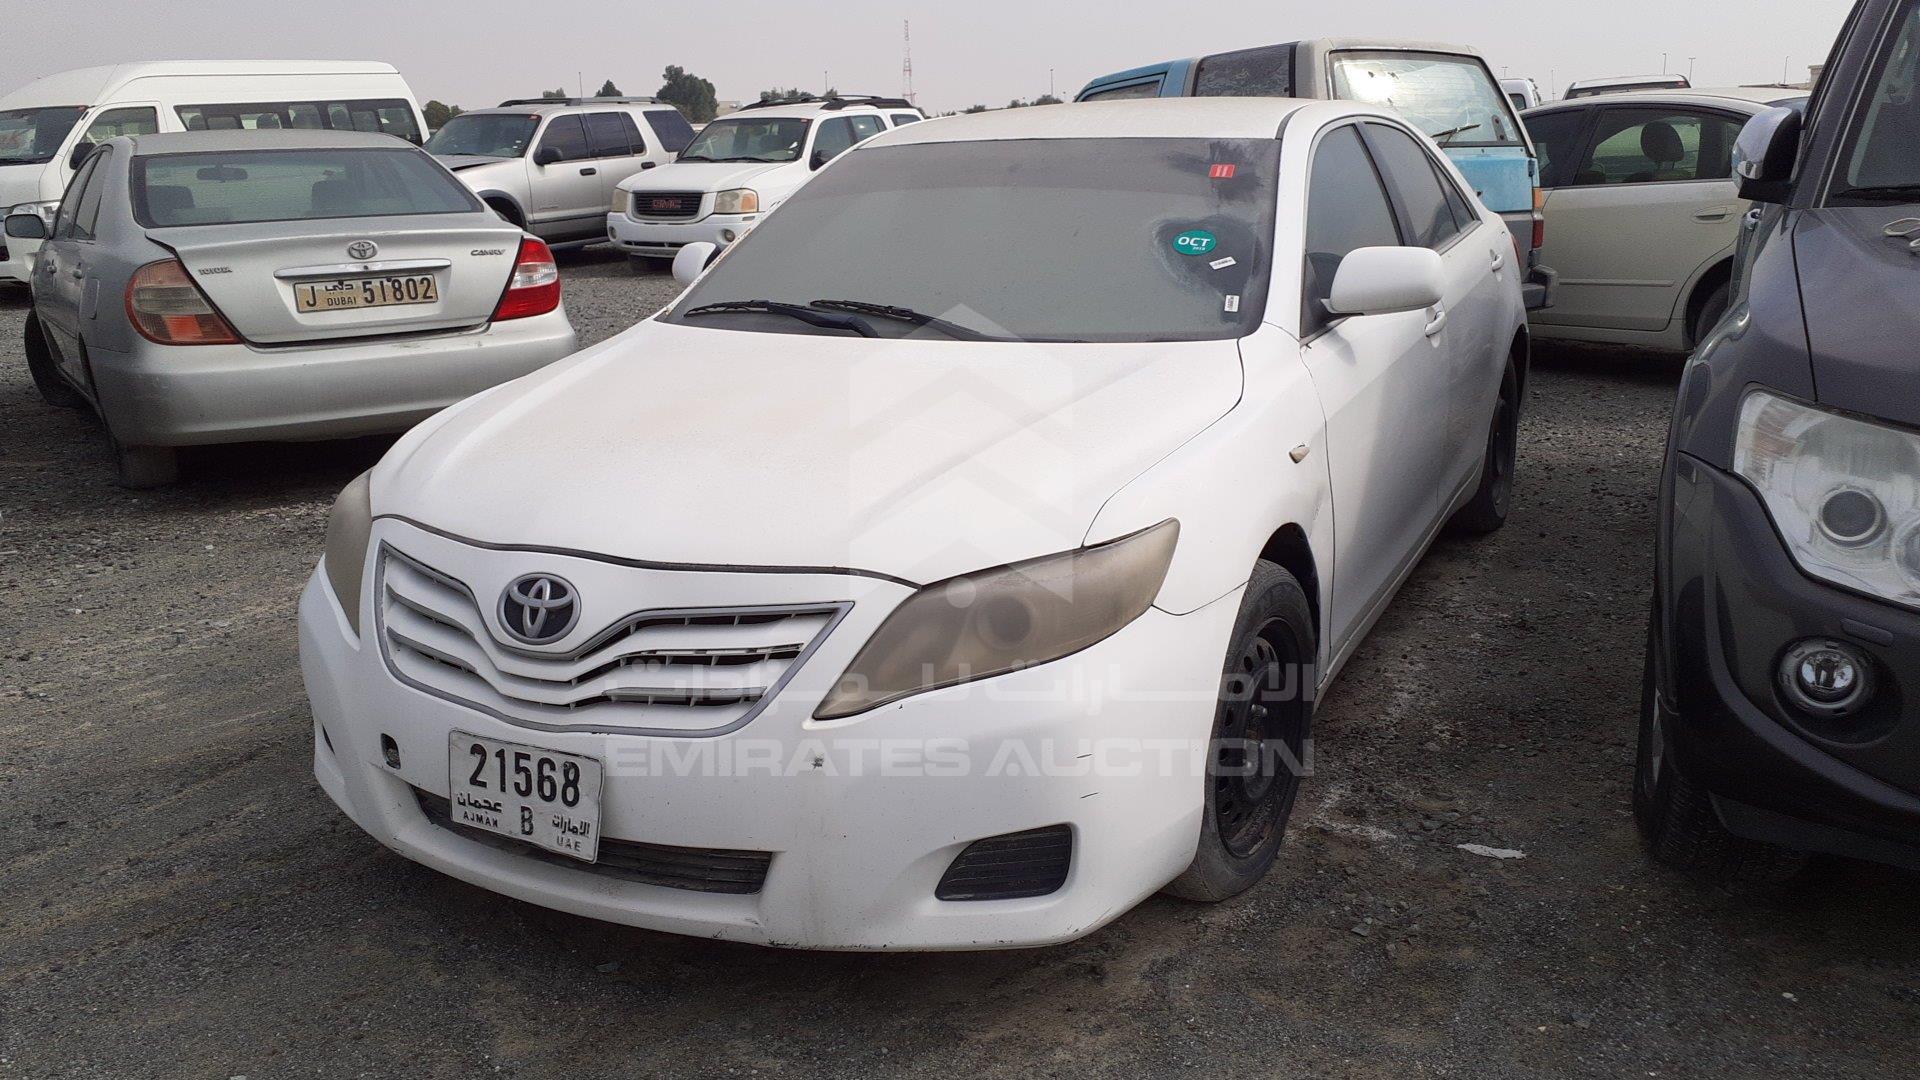 image 21 - more cheap cars in uae